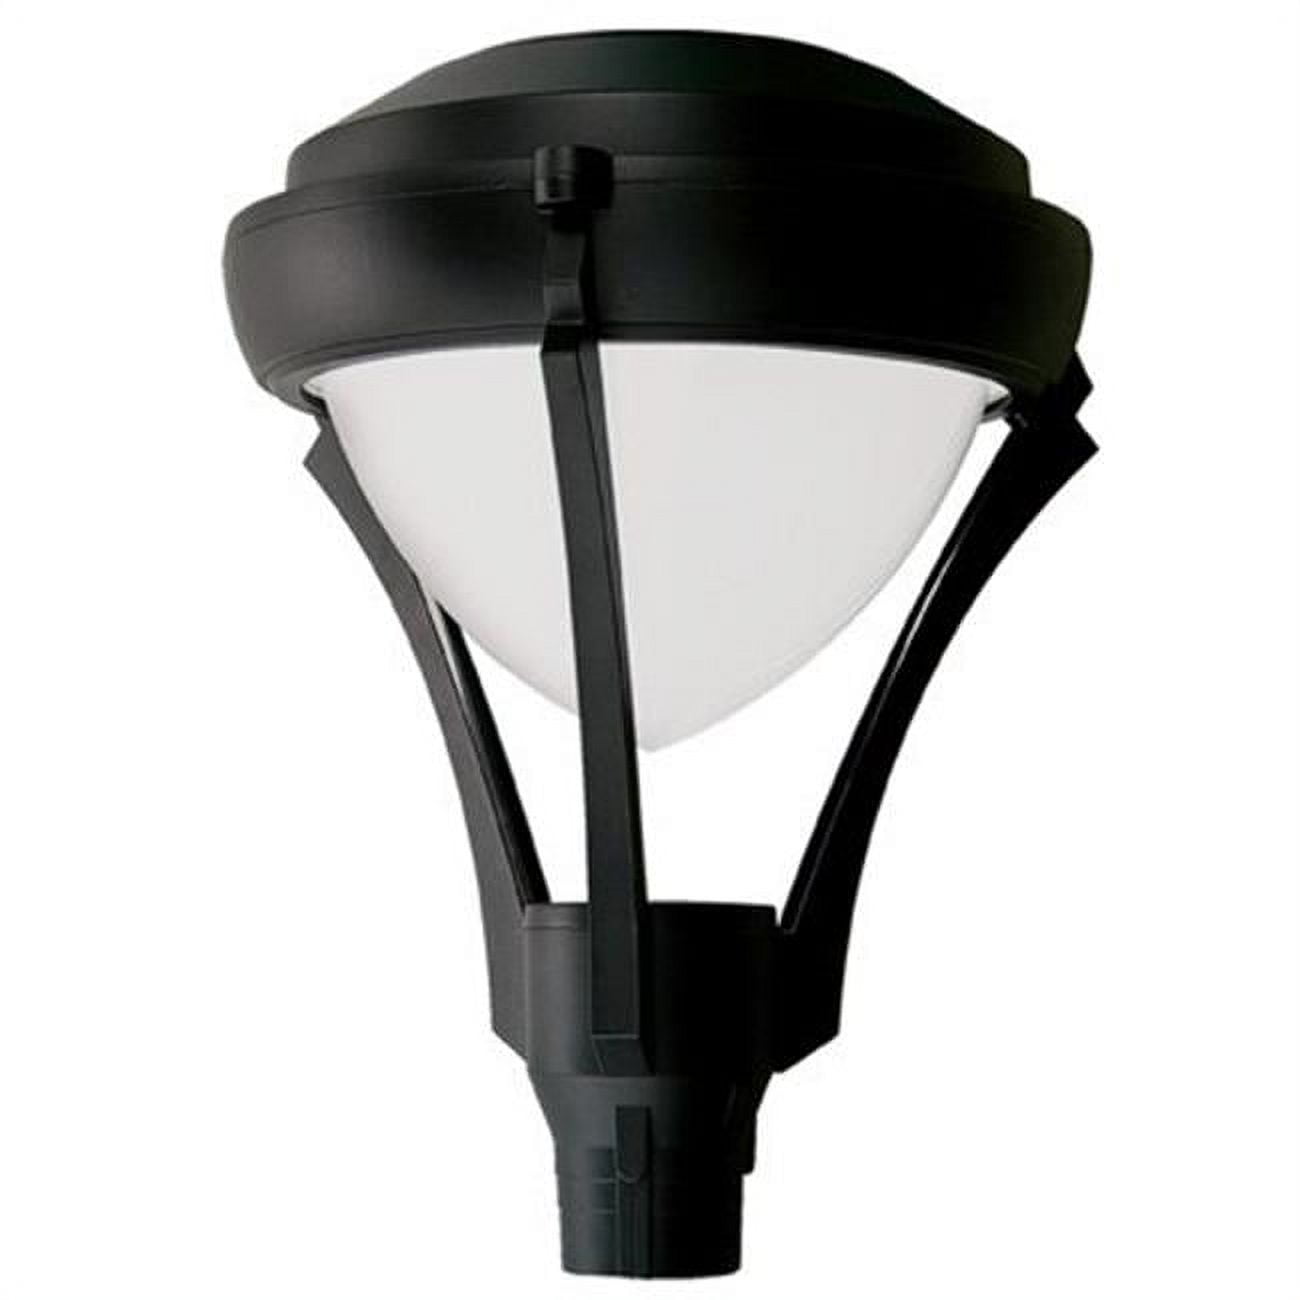 Picture of Dabmar Lighting GM592-B-MT 70W Powder Coated Cast Aluminum Post Top Light Fixture with High Pressure Sodium Lamp, Black - 27.95 x 21.65 x 21.65 in.